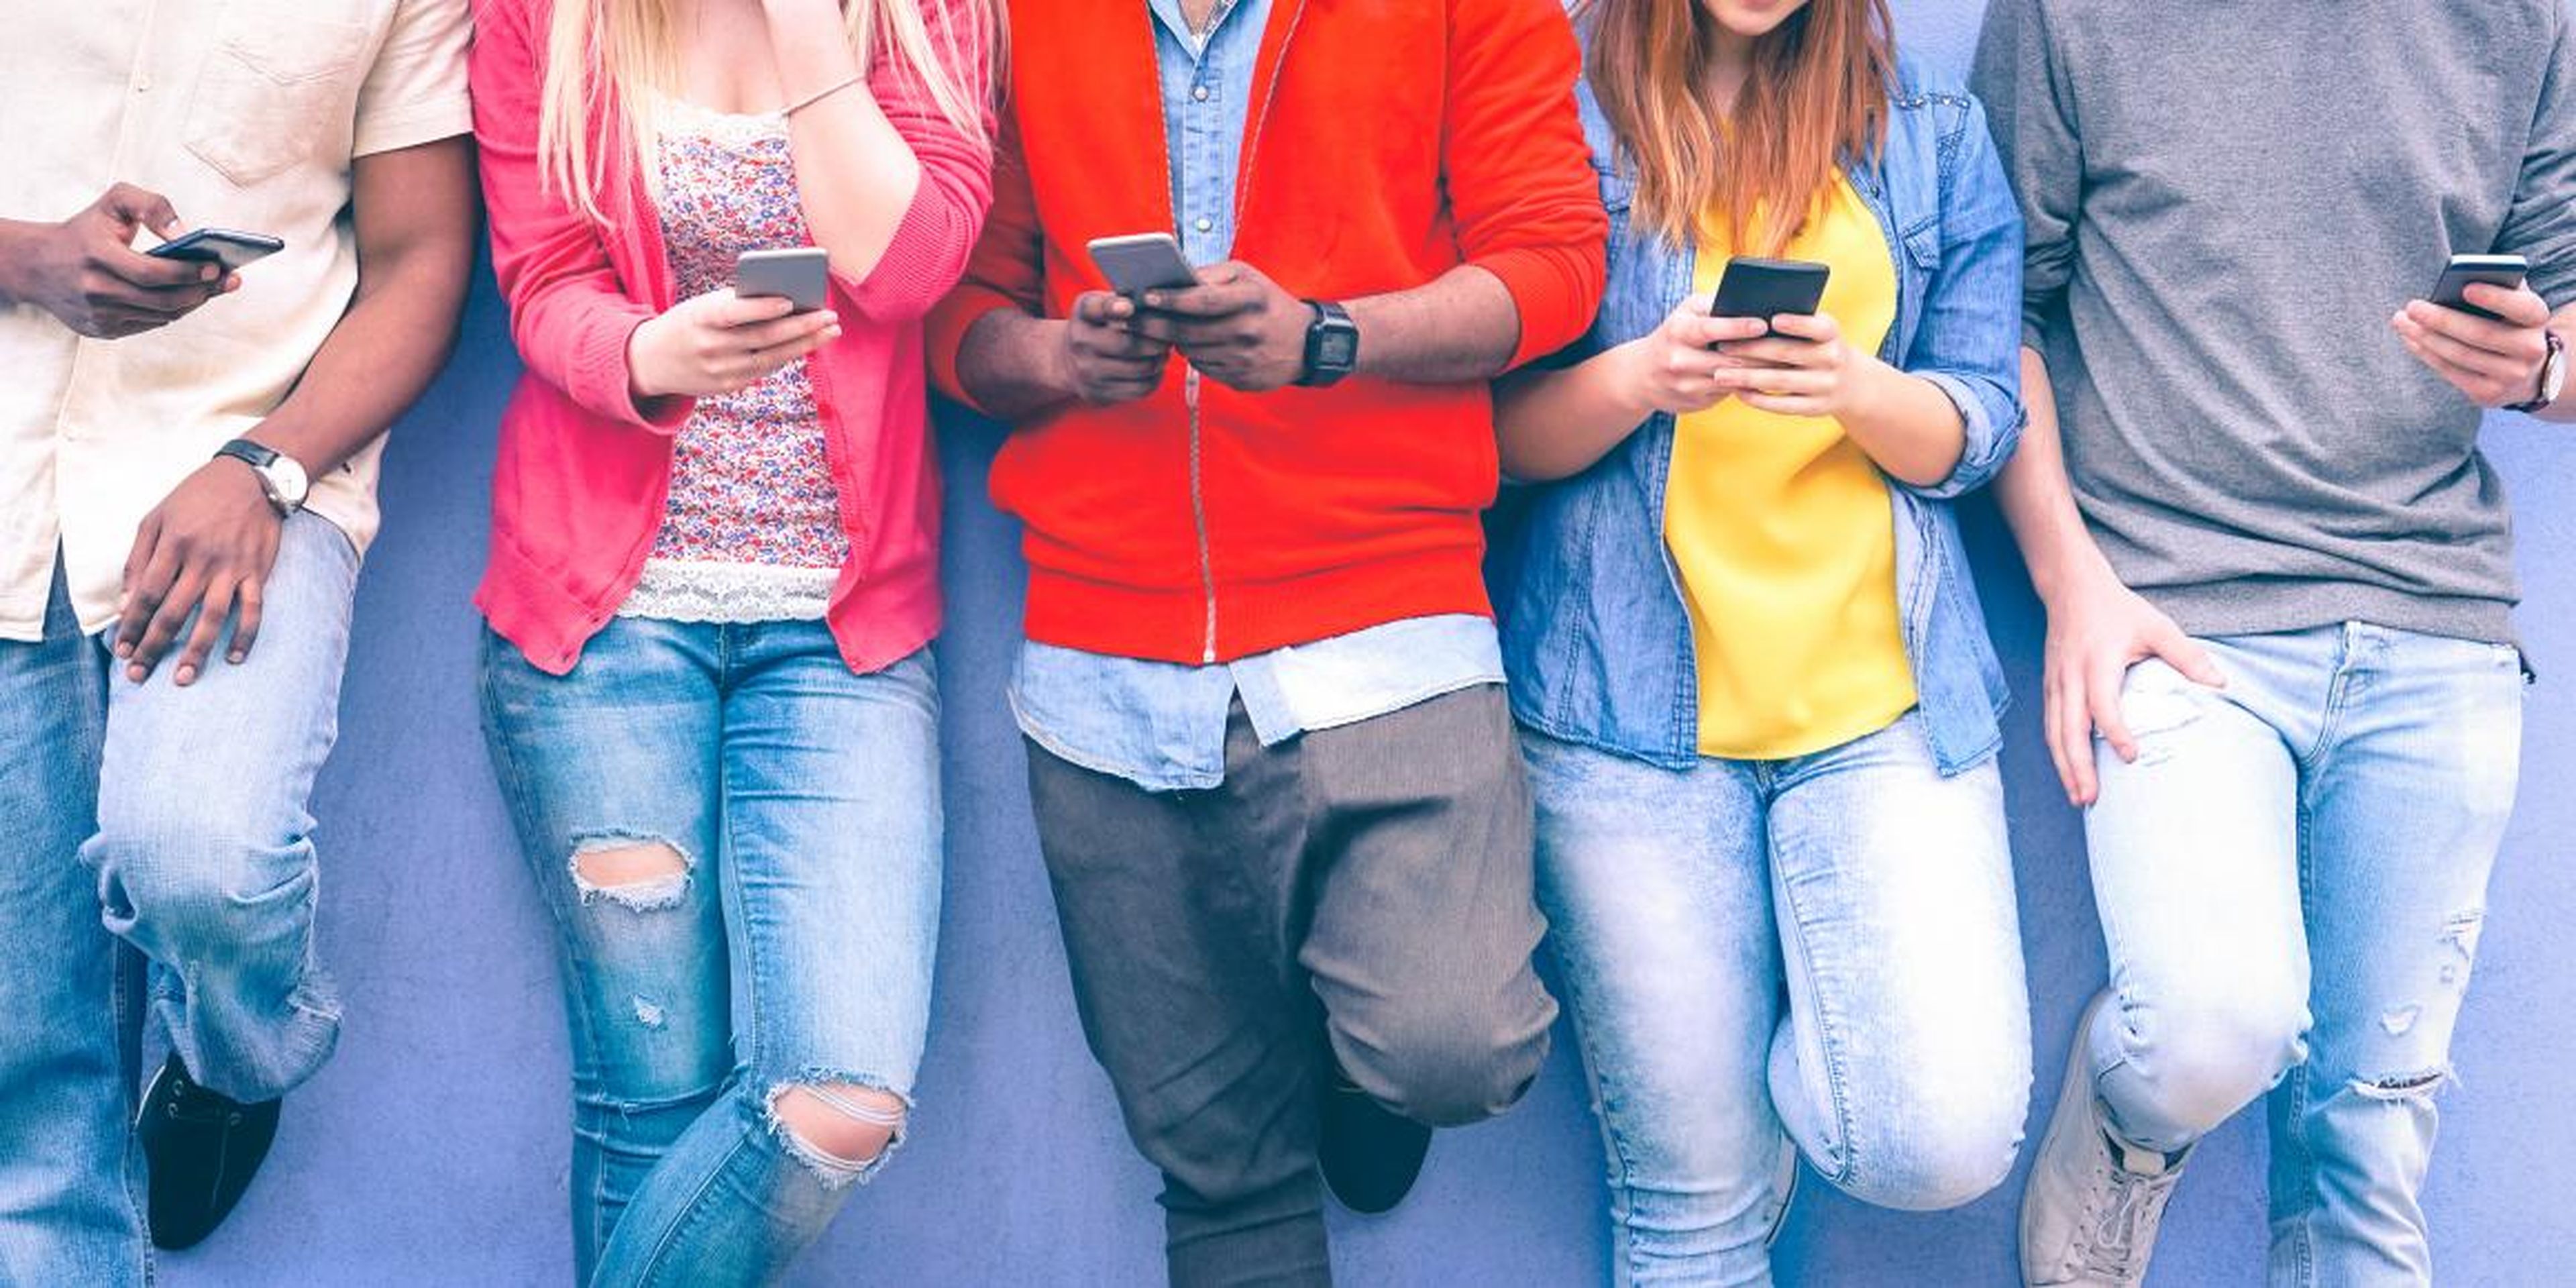 Teens would rather text than talk to their friends.